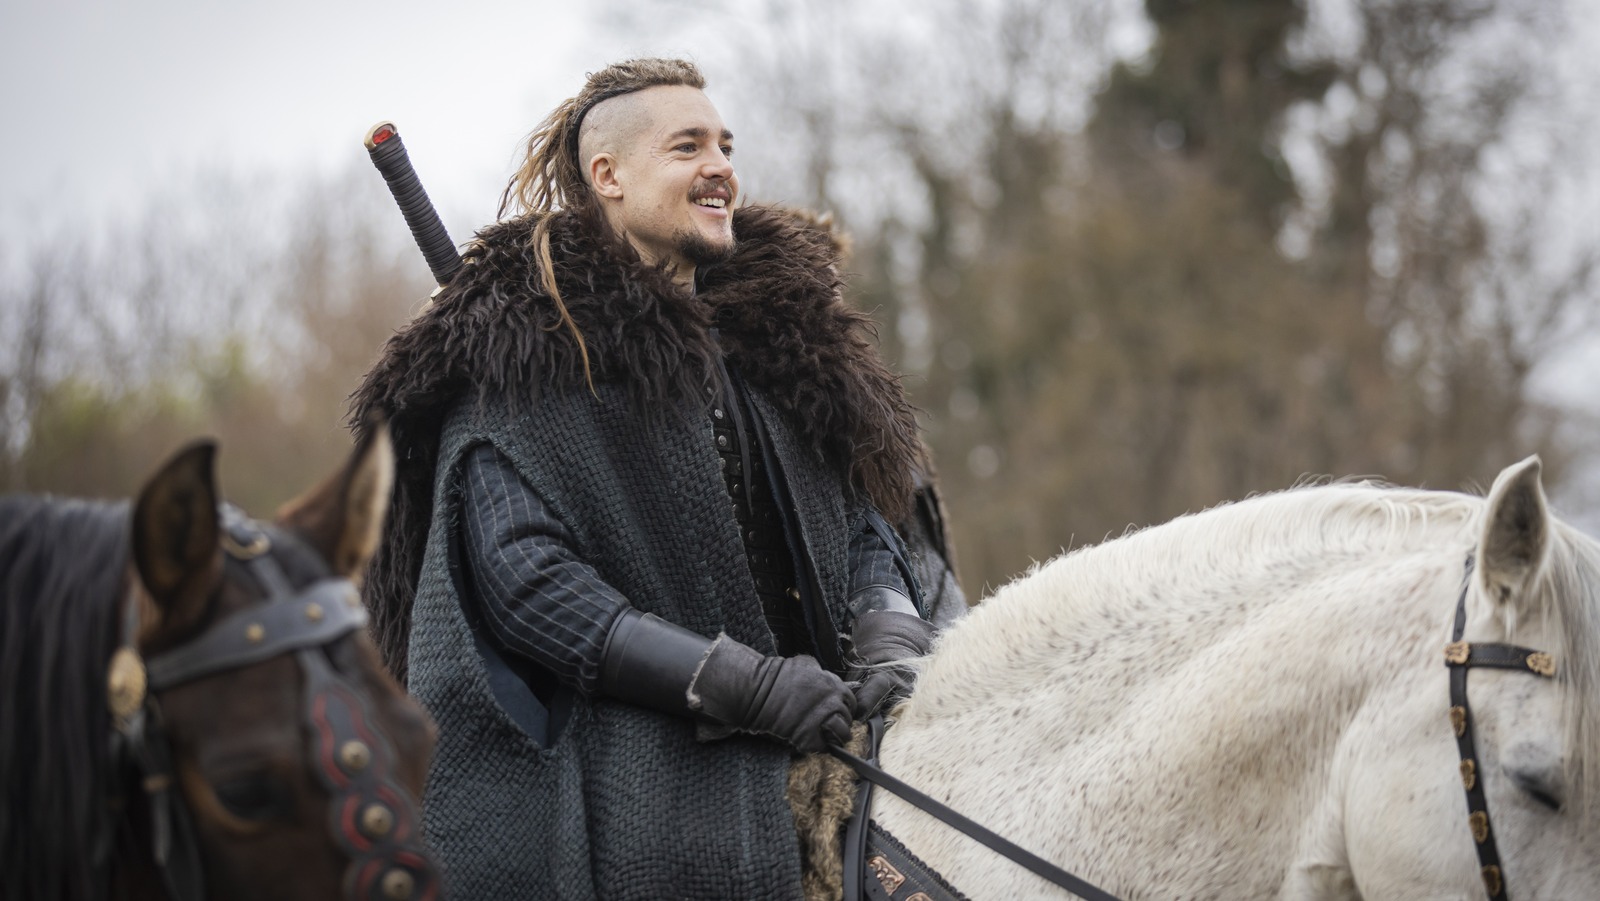 In TLK, Uhtred's father, Uhtred, said that their ancestors were